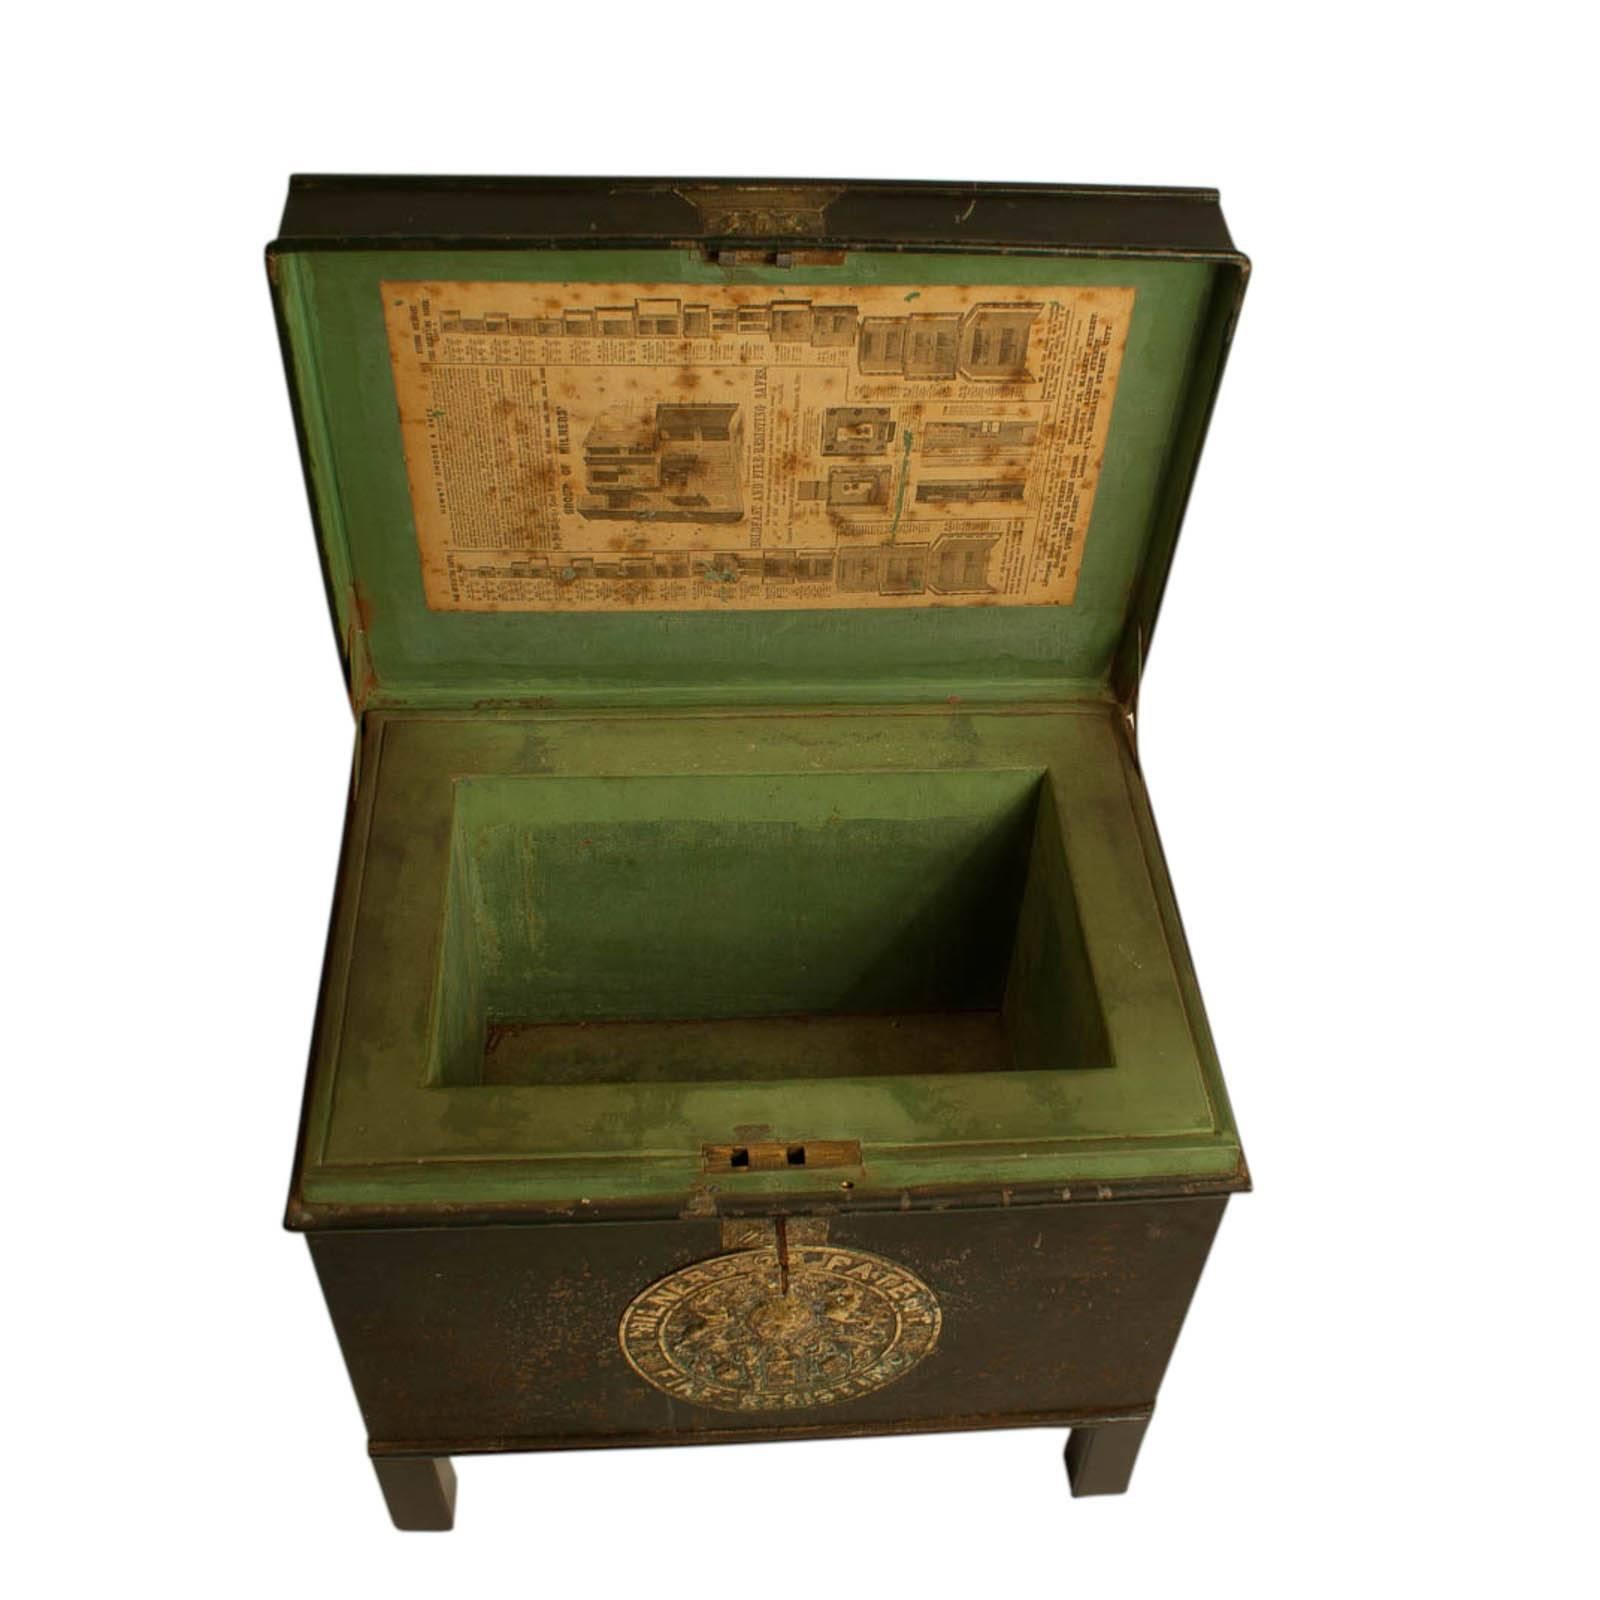 Mid-19th Century English Victorian Metal Fire Safe in Bottle Green circa 1860 with Key